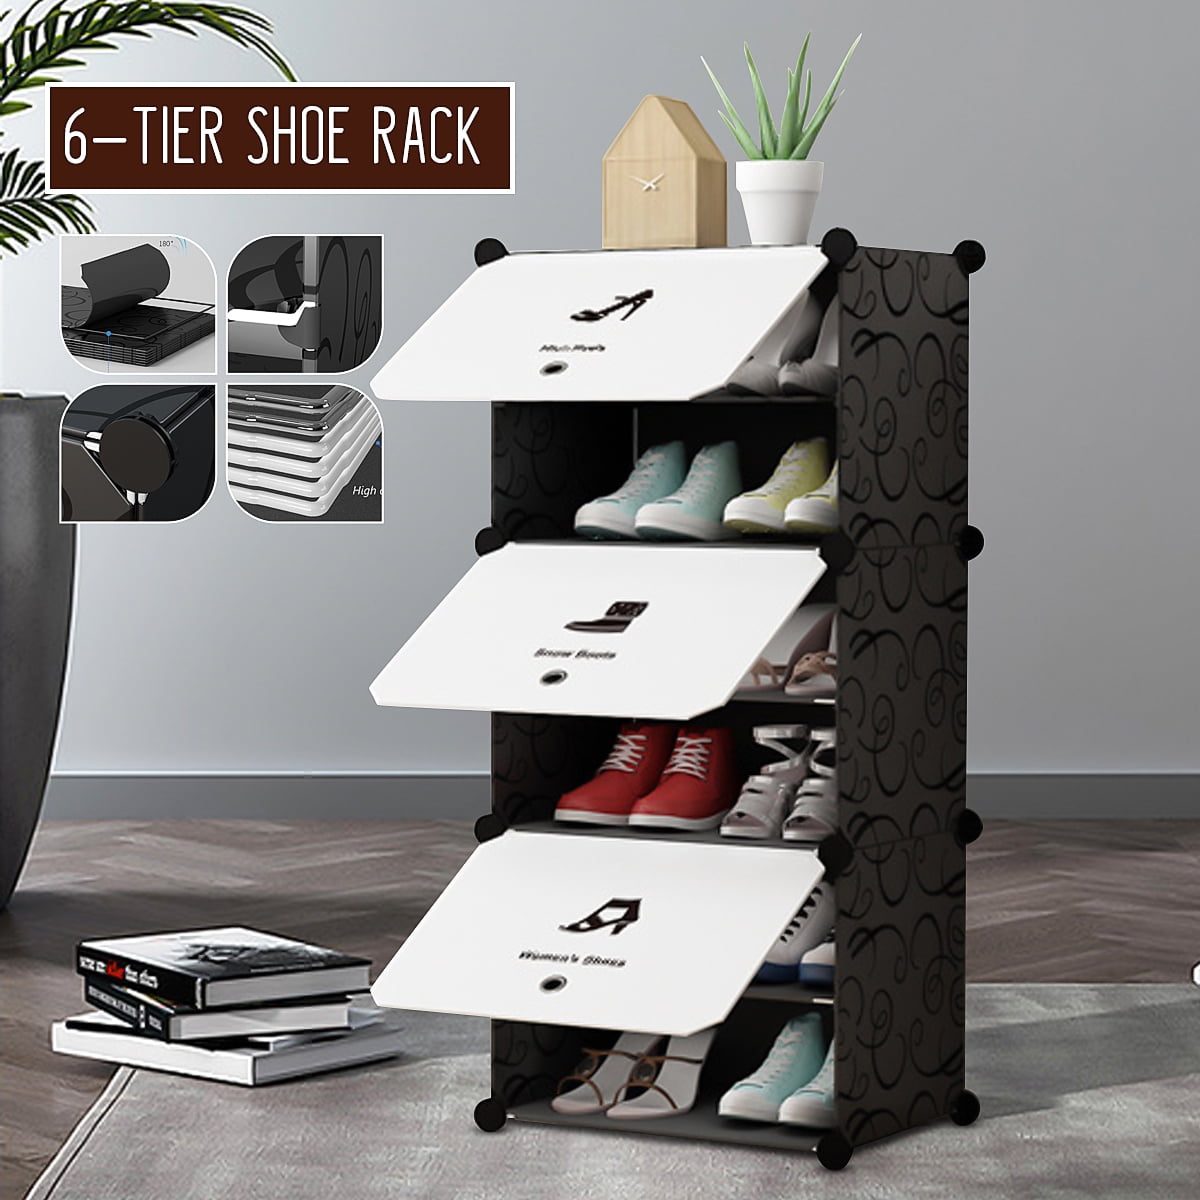 New 4 6 Tier Cube Portable Shoe Rack Closed And Dustproof Shoe Rack